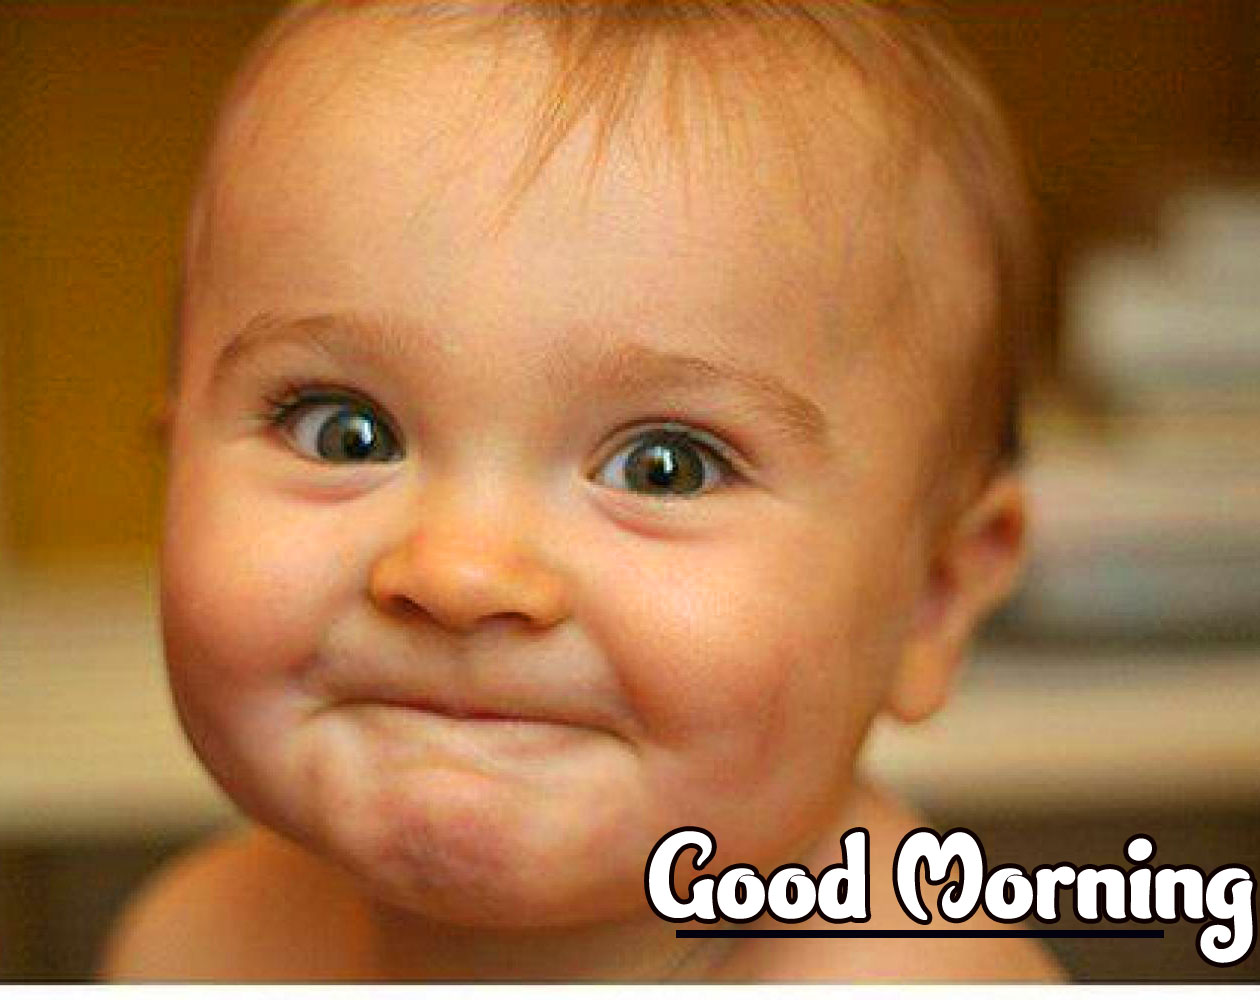 Funny Good Morning Wishes pics Wallpaper Free Download 